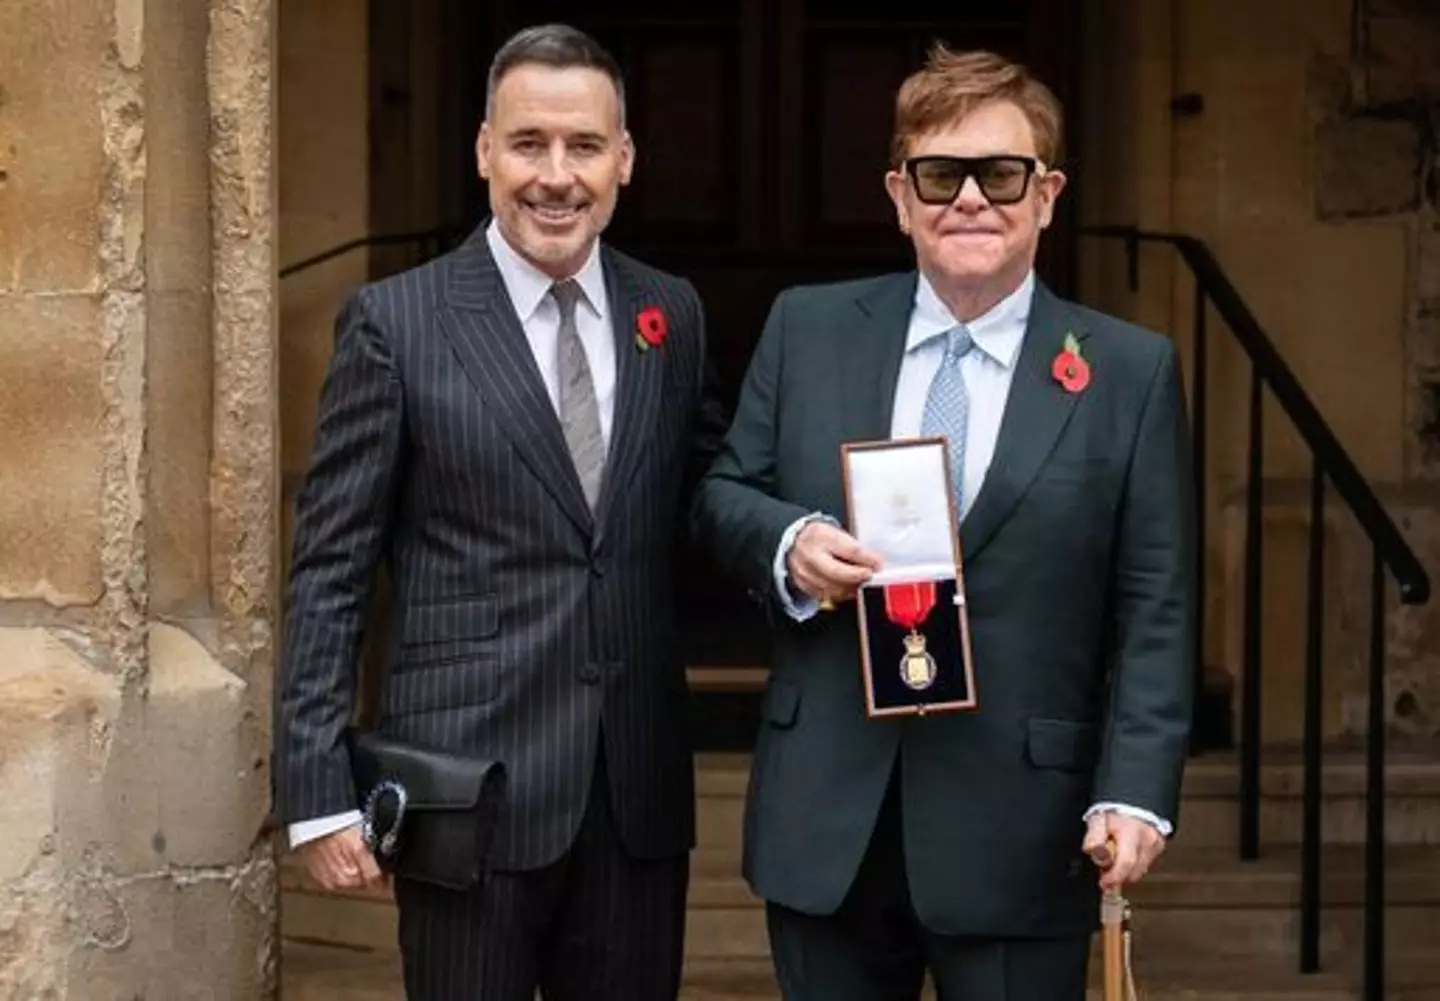 Sir Elton John with his husband David Furnish (left) after being made a member of the Order of the Companions of Honour.(